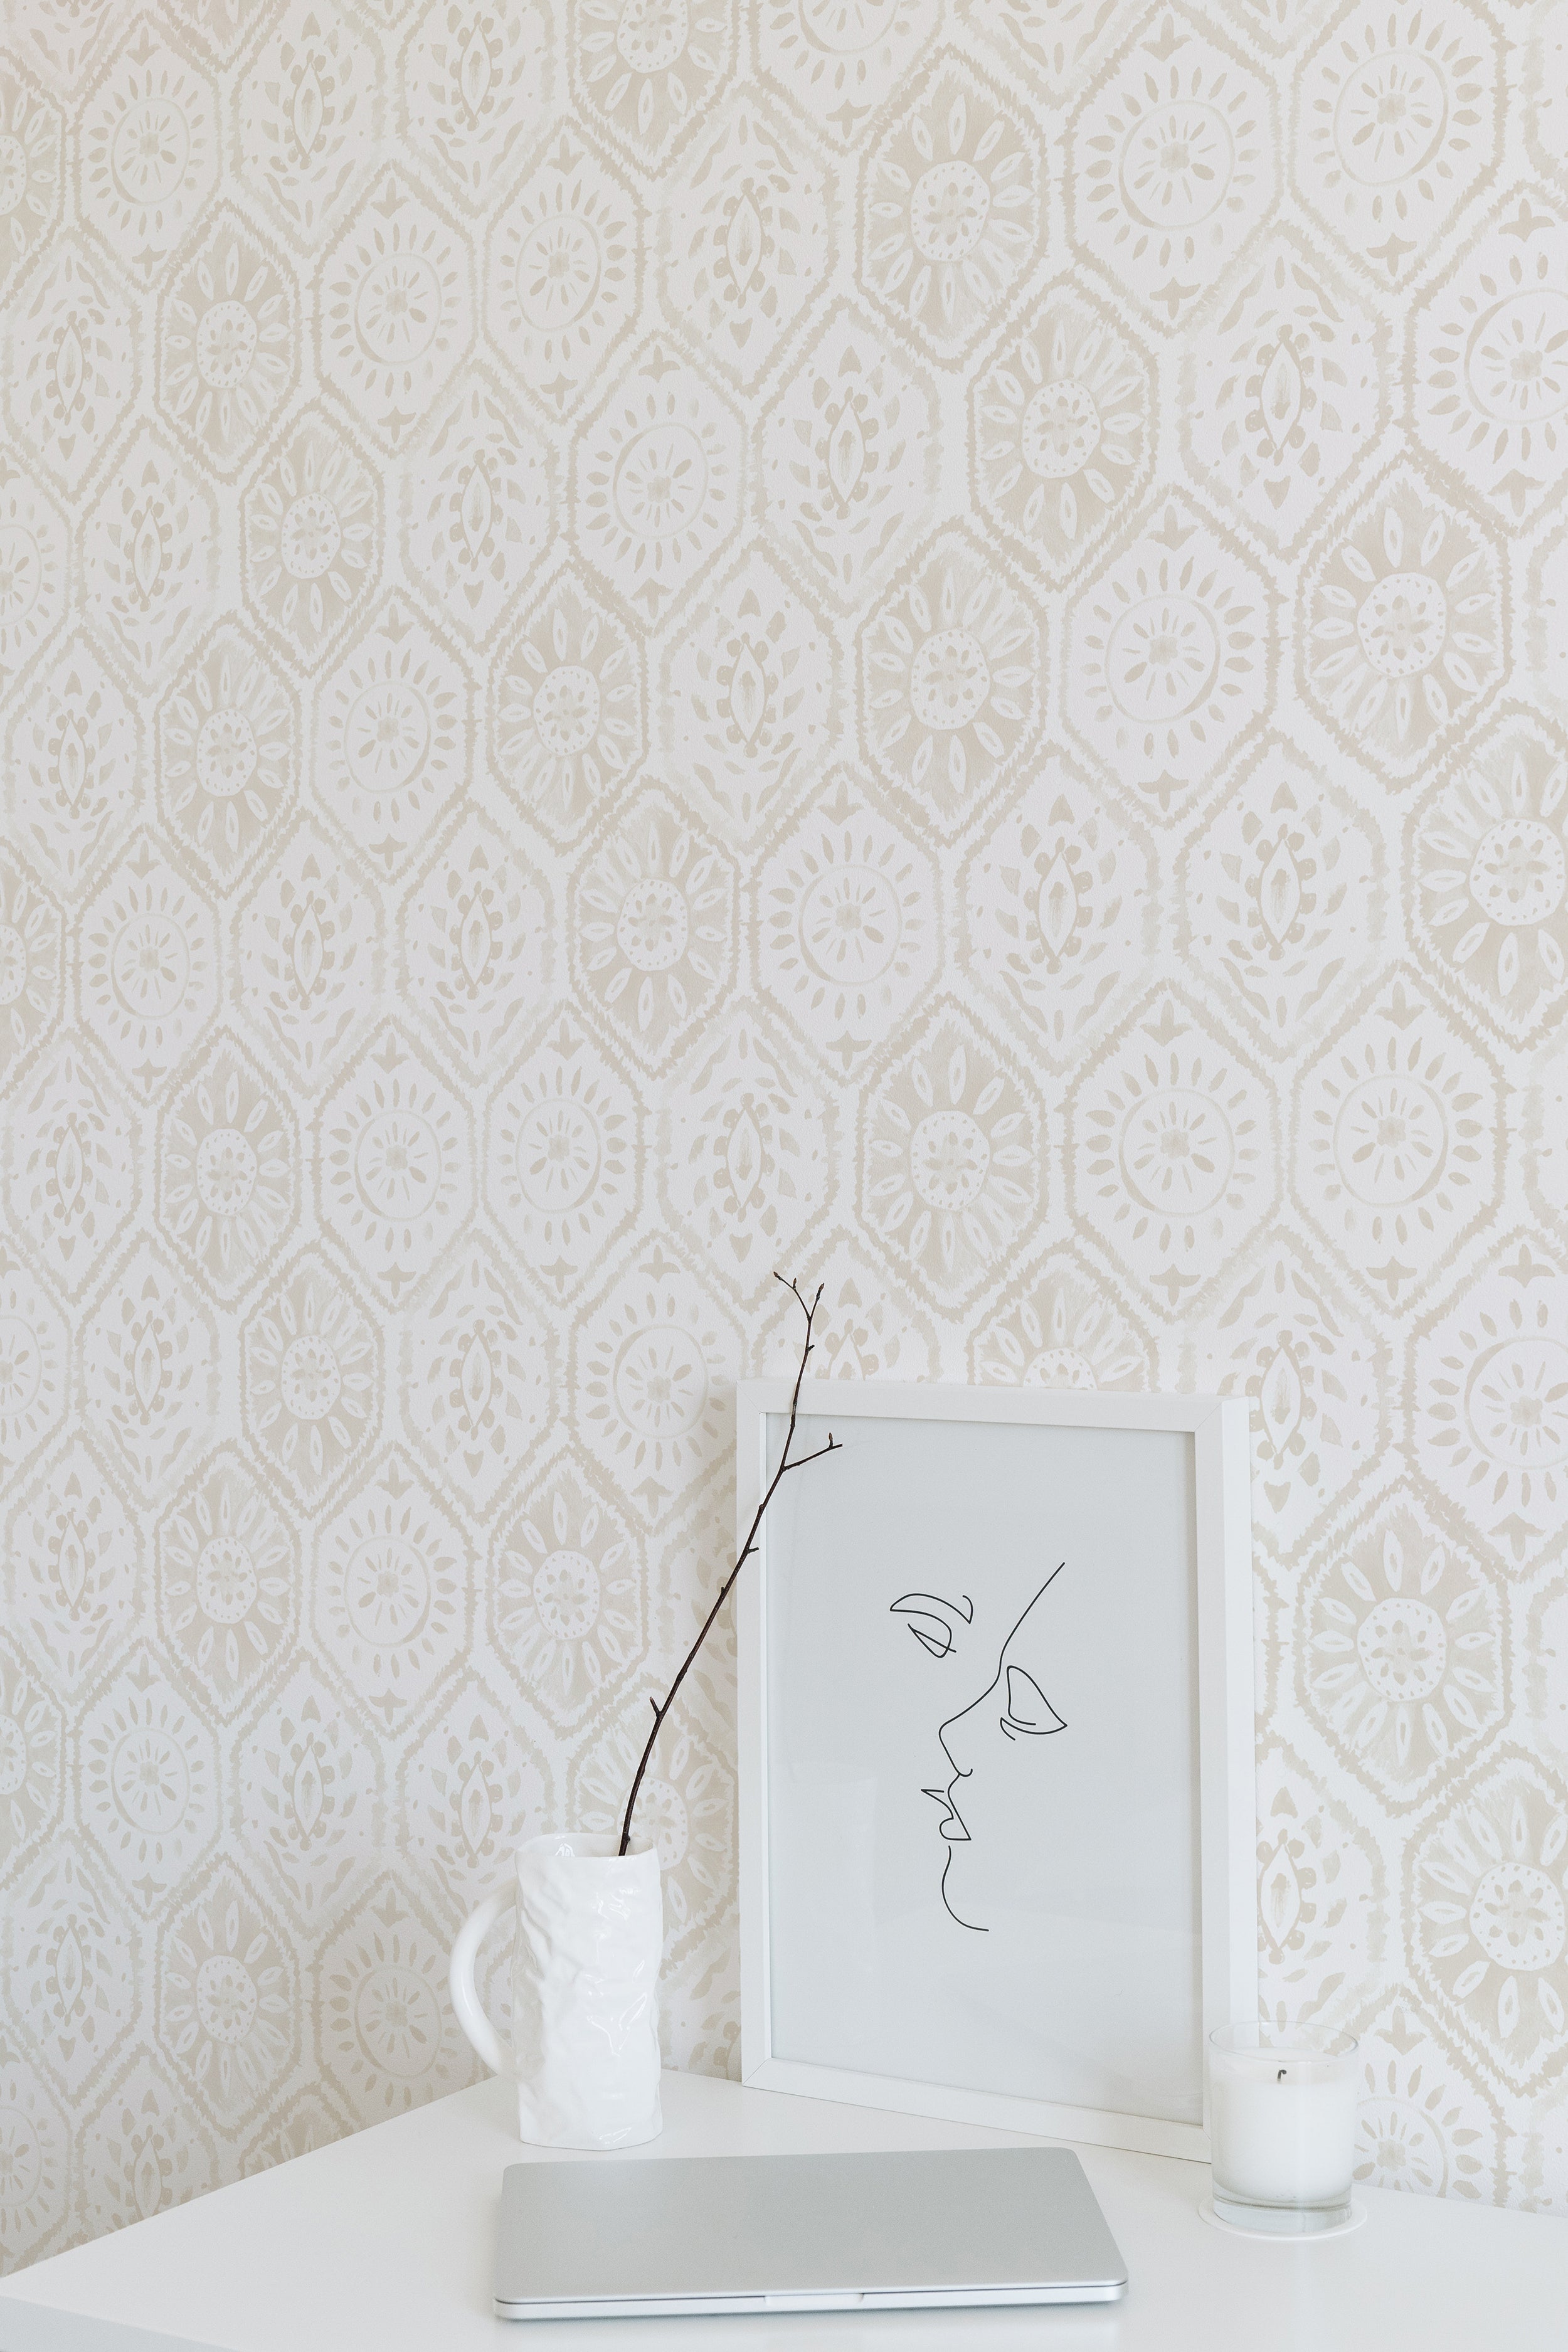 A minimalist workspace highlighted by the Moroccan Tile Wallpaper in Ecru. The wallpaper's intricate pattern provides a soft, decorative background that pairs well with the simple desk, modern line art in a frame, a white laptop, and a single branch in a vase, creating a serene and stylish area.